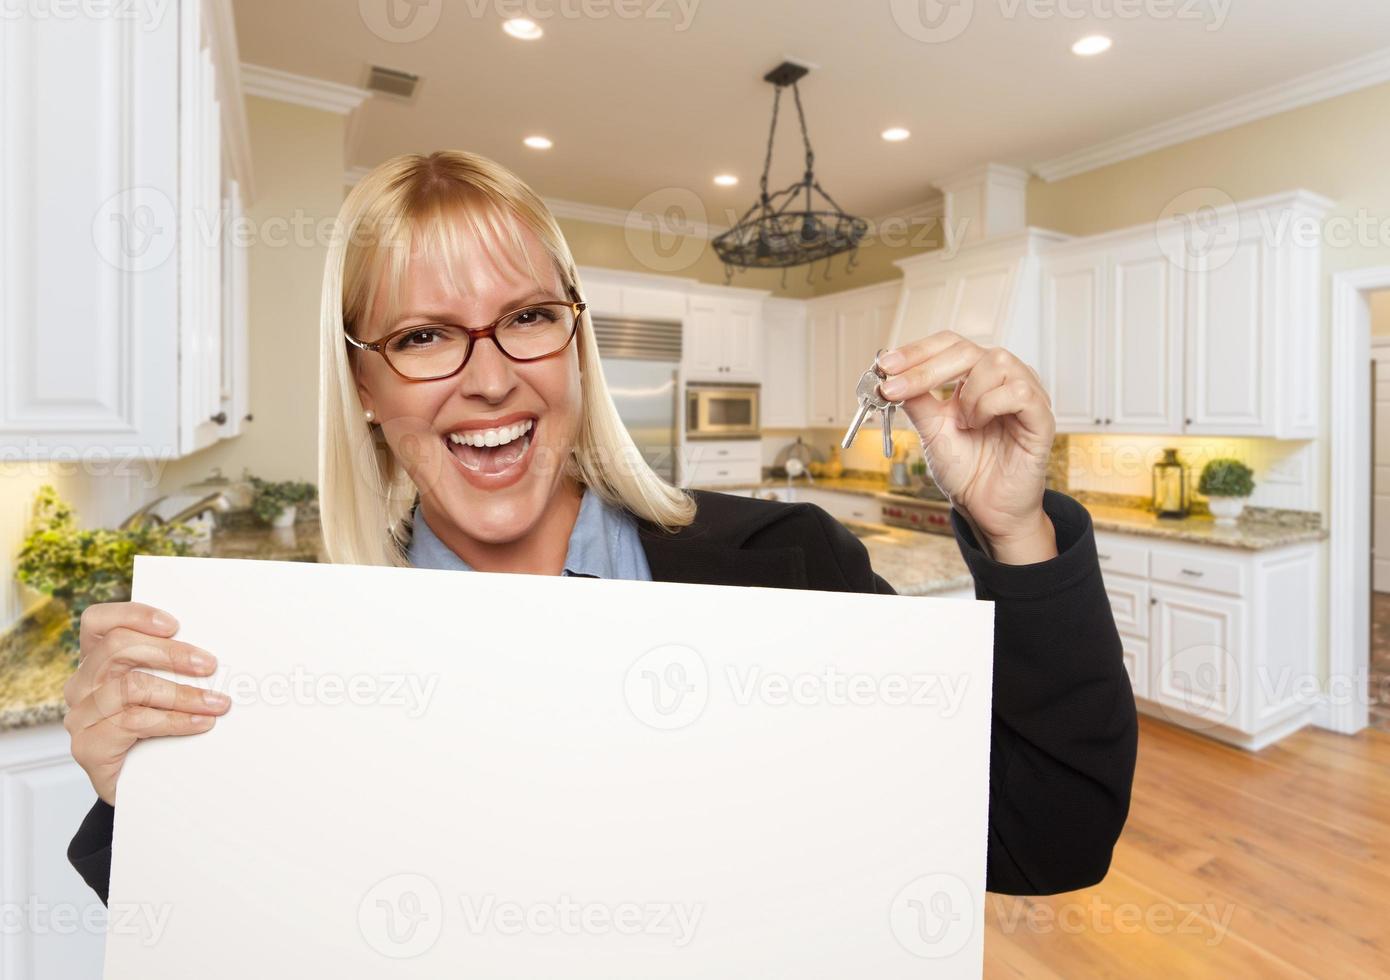 Young Woman Holding Blank Sign and Keys Inside Kitchen photo